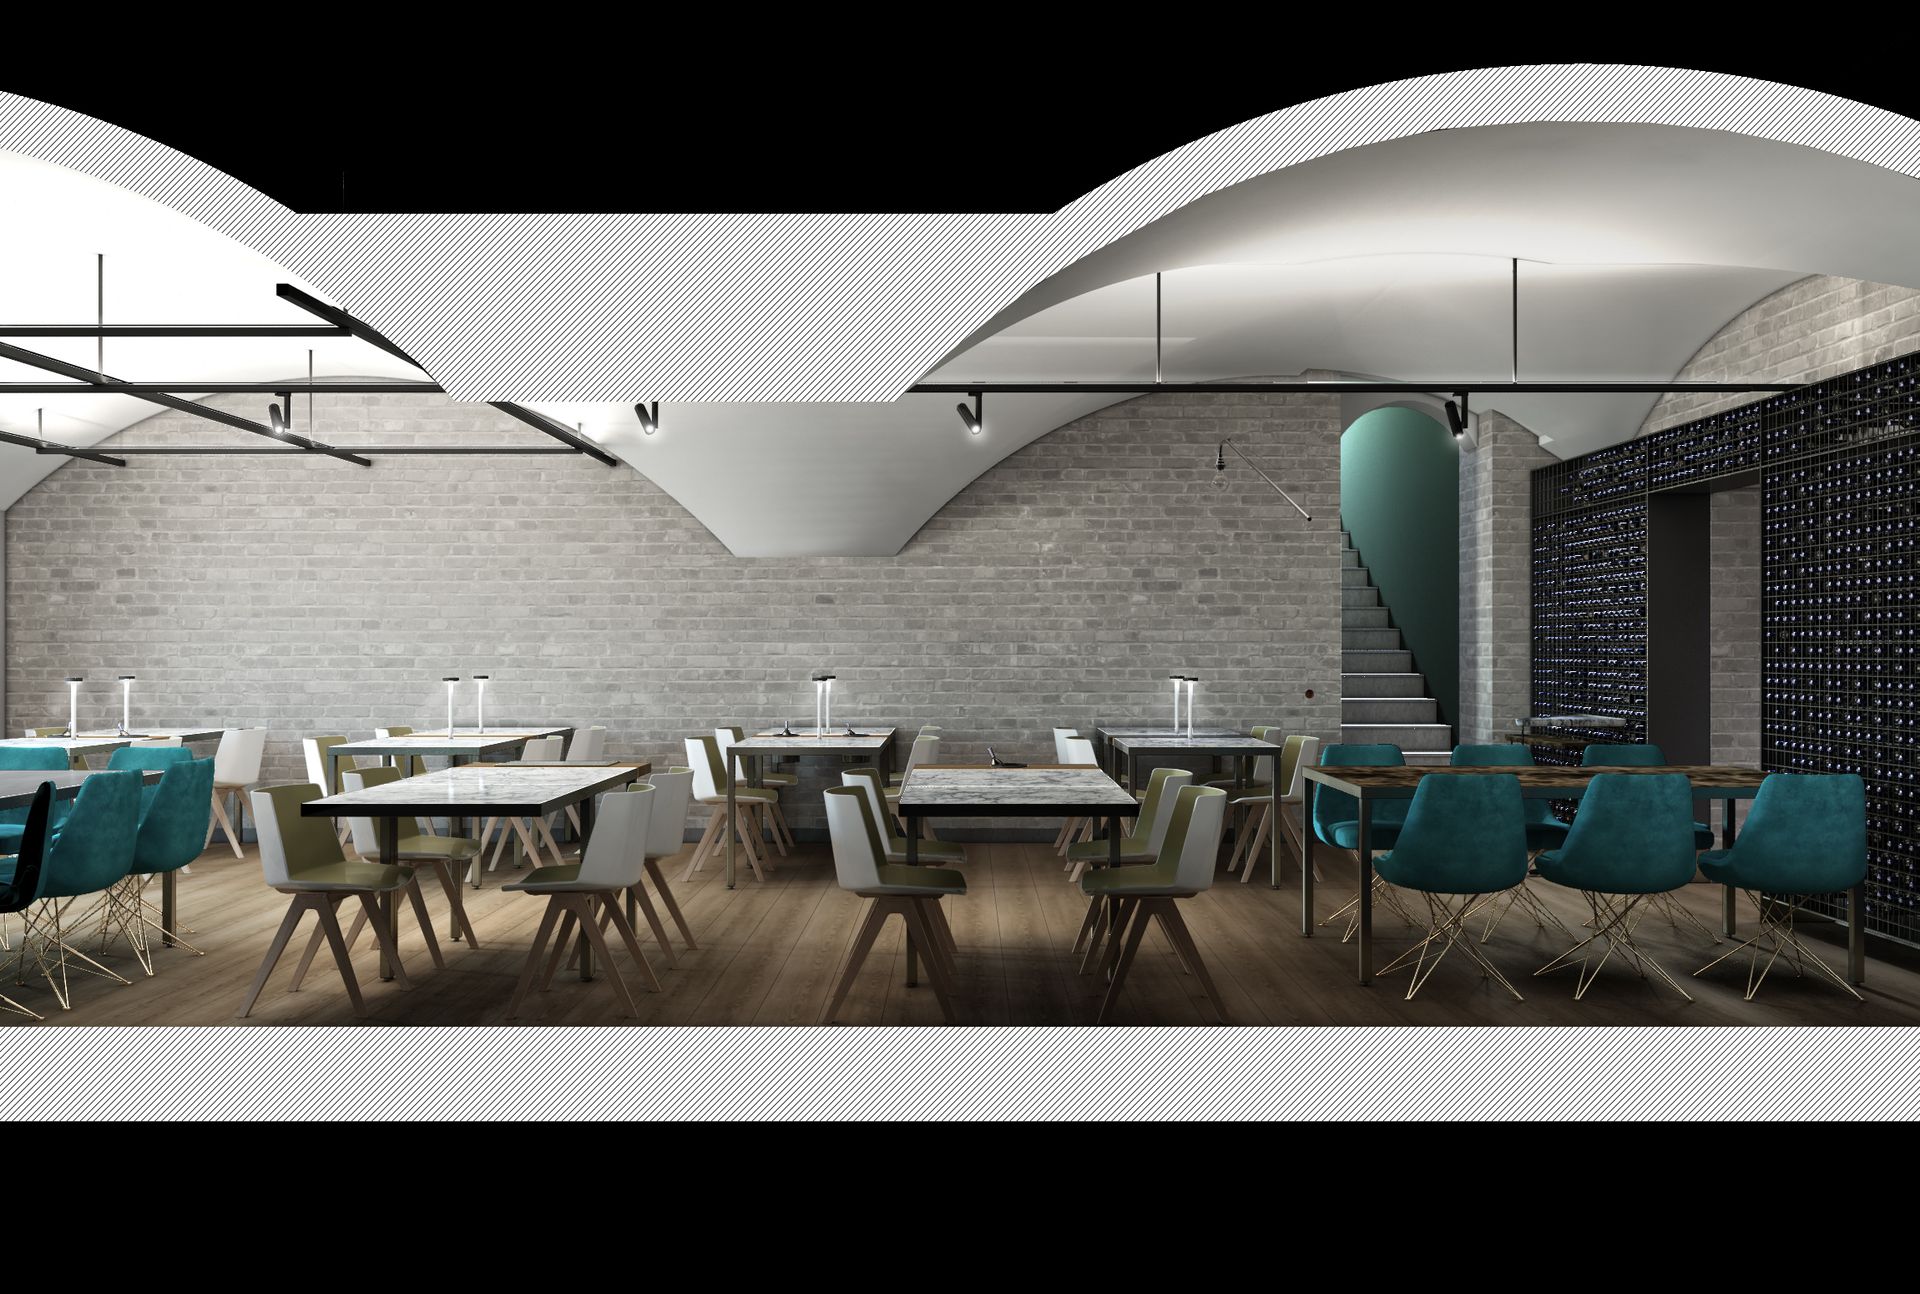 Interior design project, bistrot restaurant renovation with barrel vaults, exposed bricks and convivium table. Officina Magisafi architecture design - section